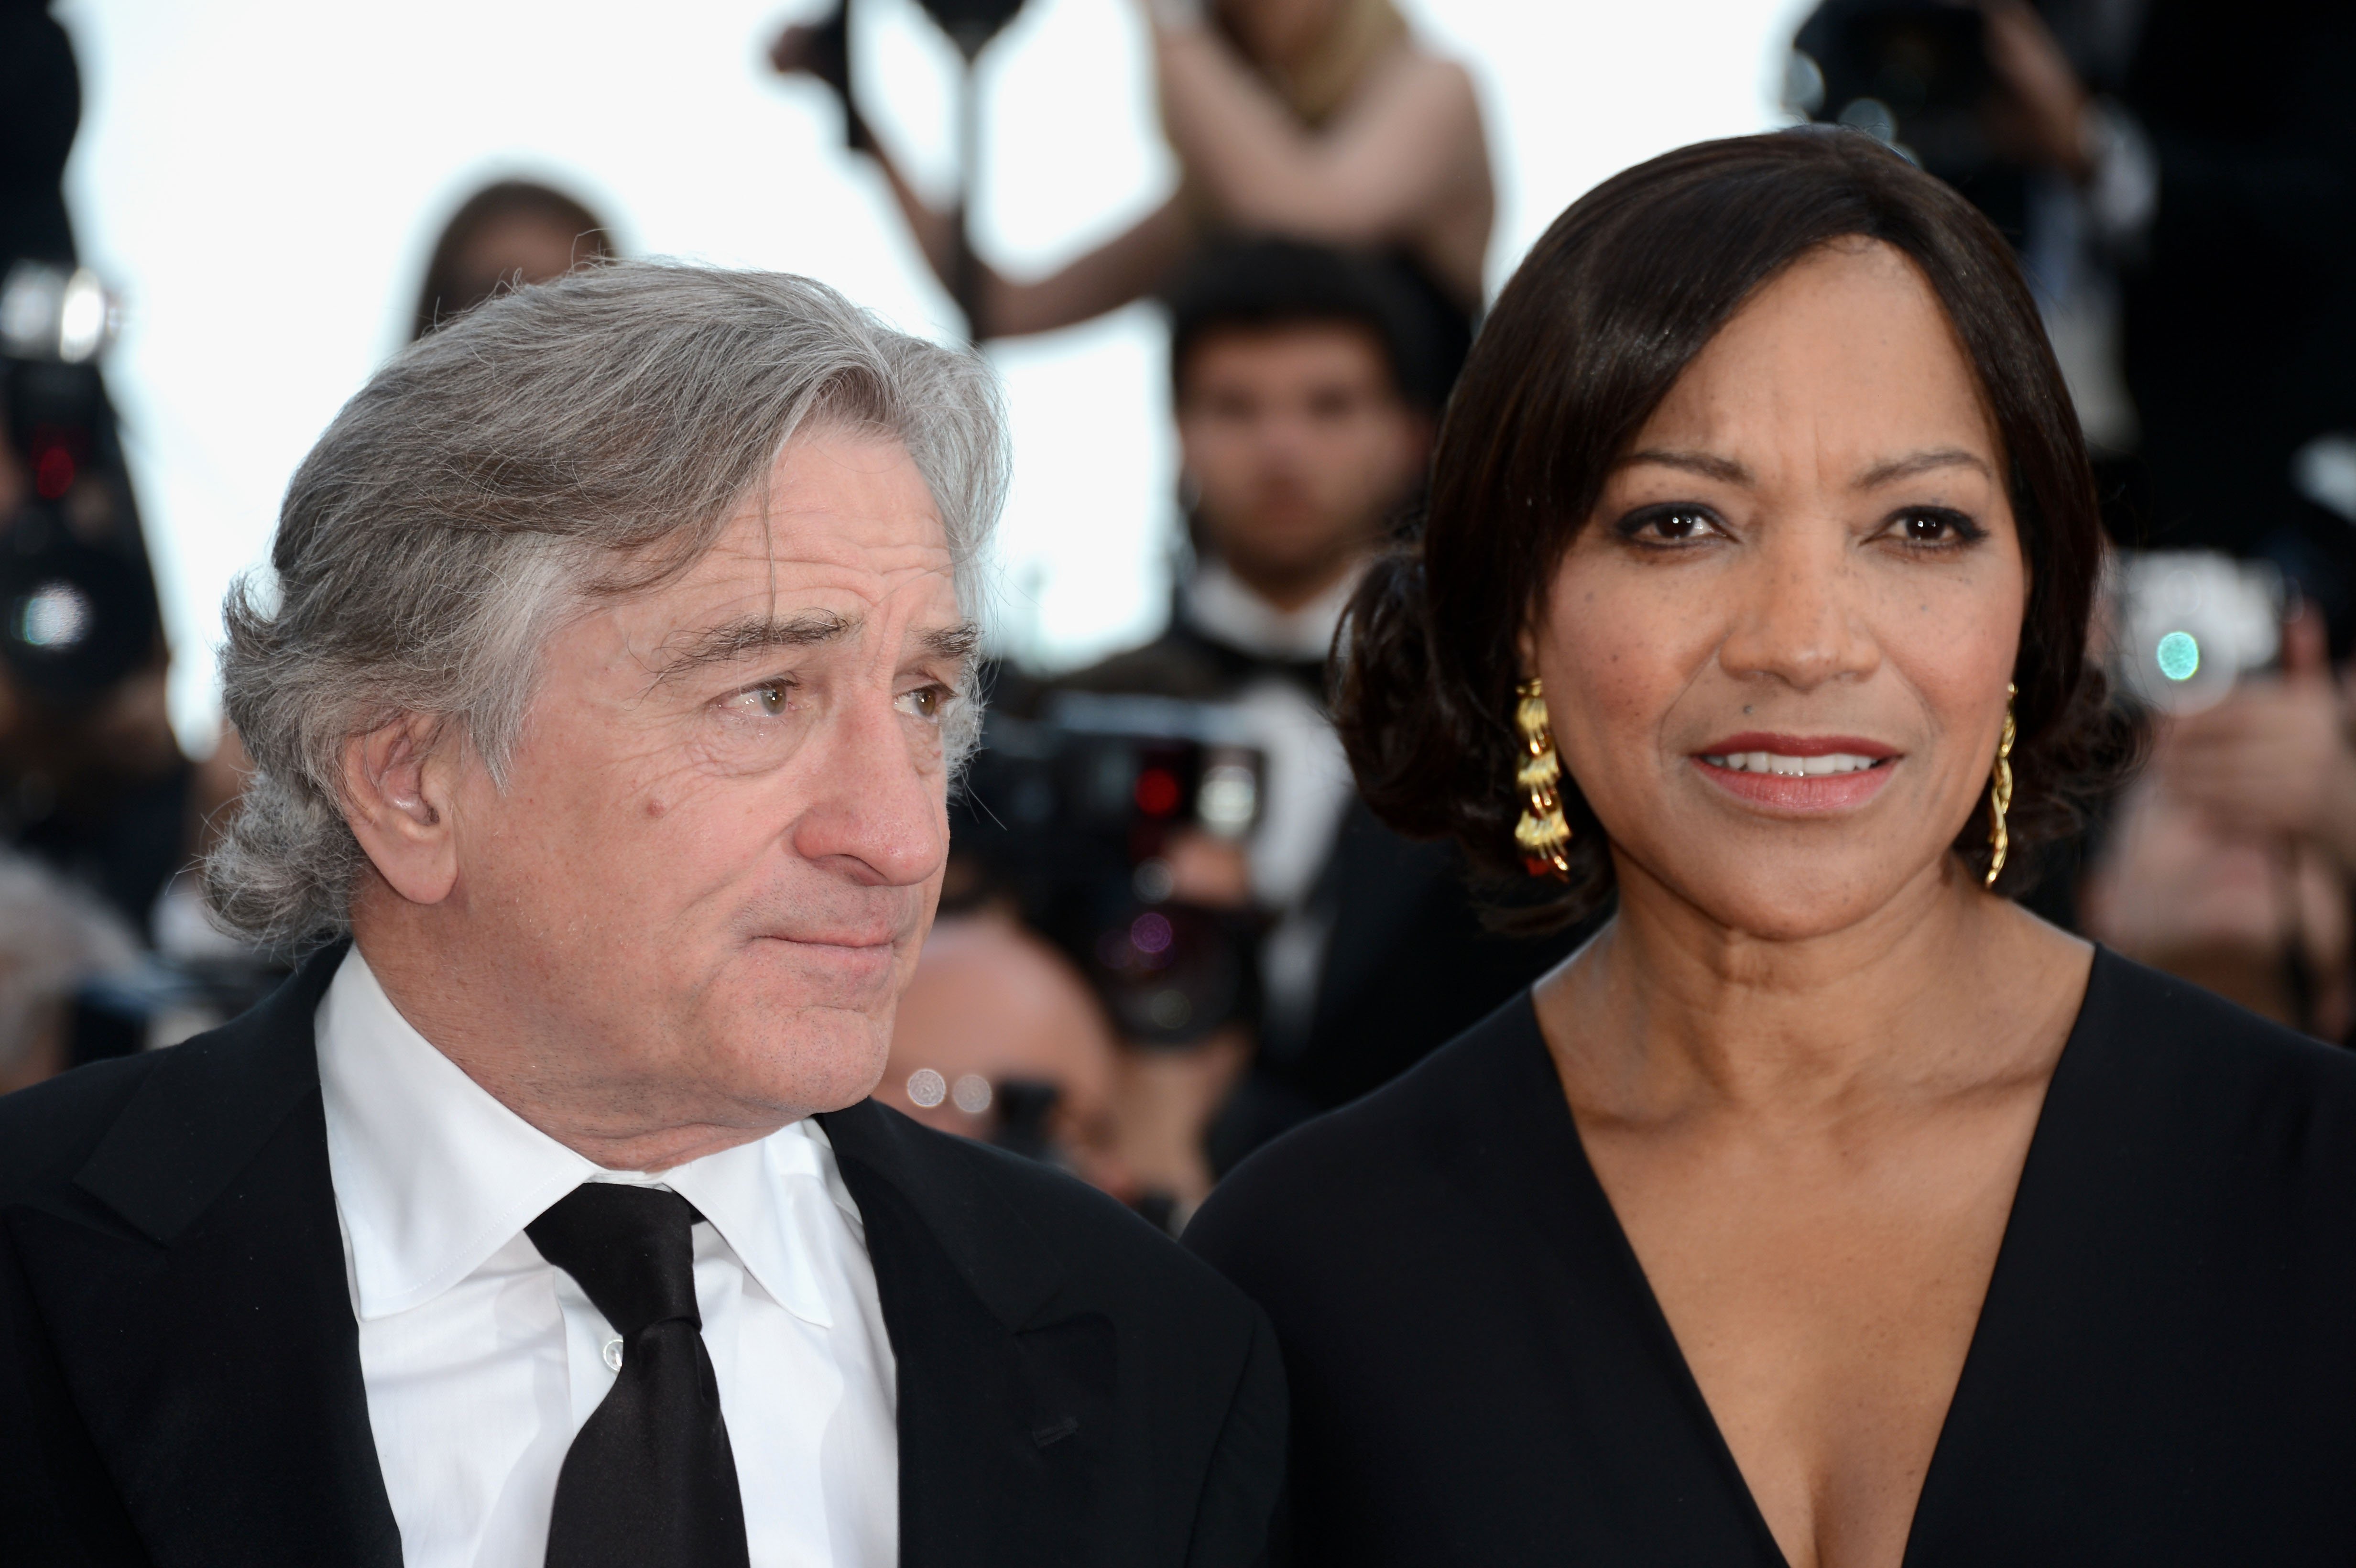 Robert De Niro and wife Grace Hightower attend the 'Once Upon A Time' Premiere during 65th Annual Cannes Film Festival during at Palais des Festivals on May 18, 2012 in Cannes, France | Source: Getty Images 